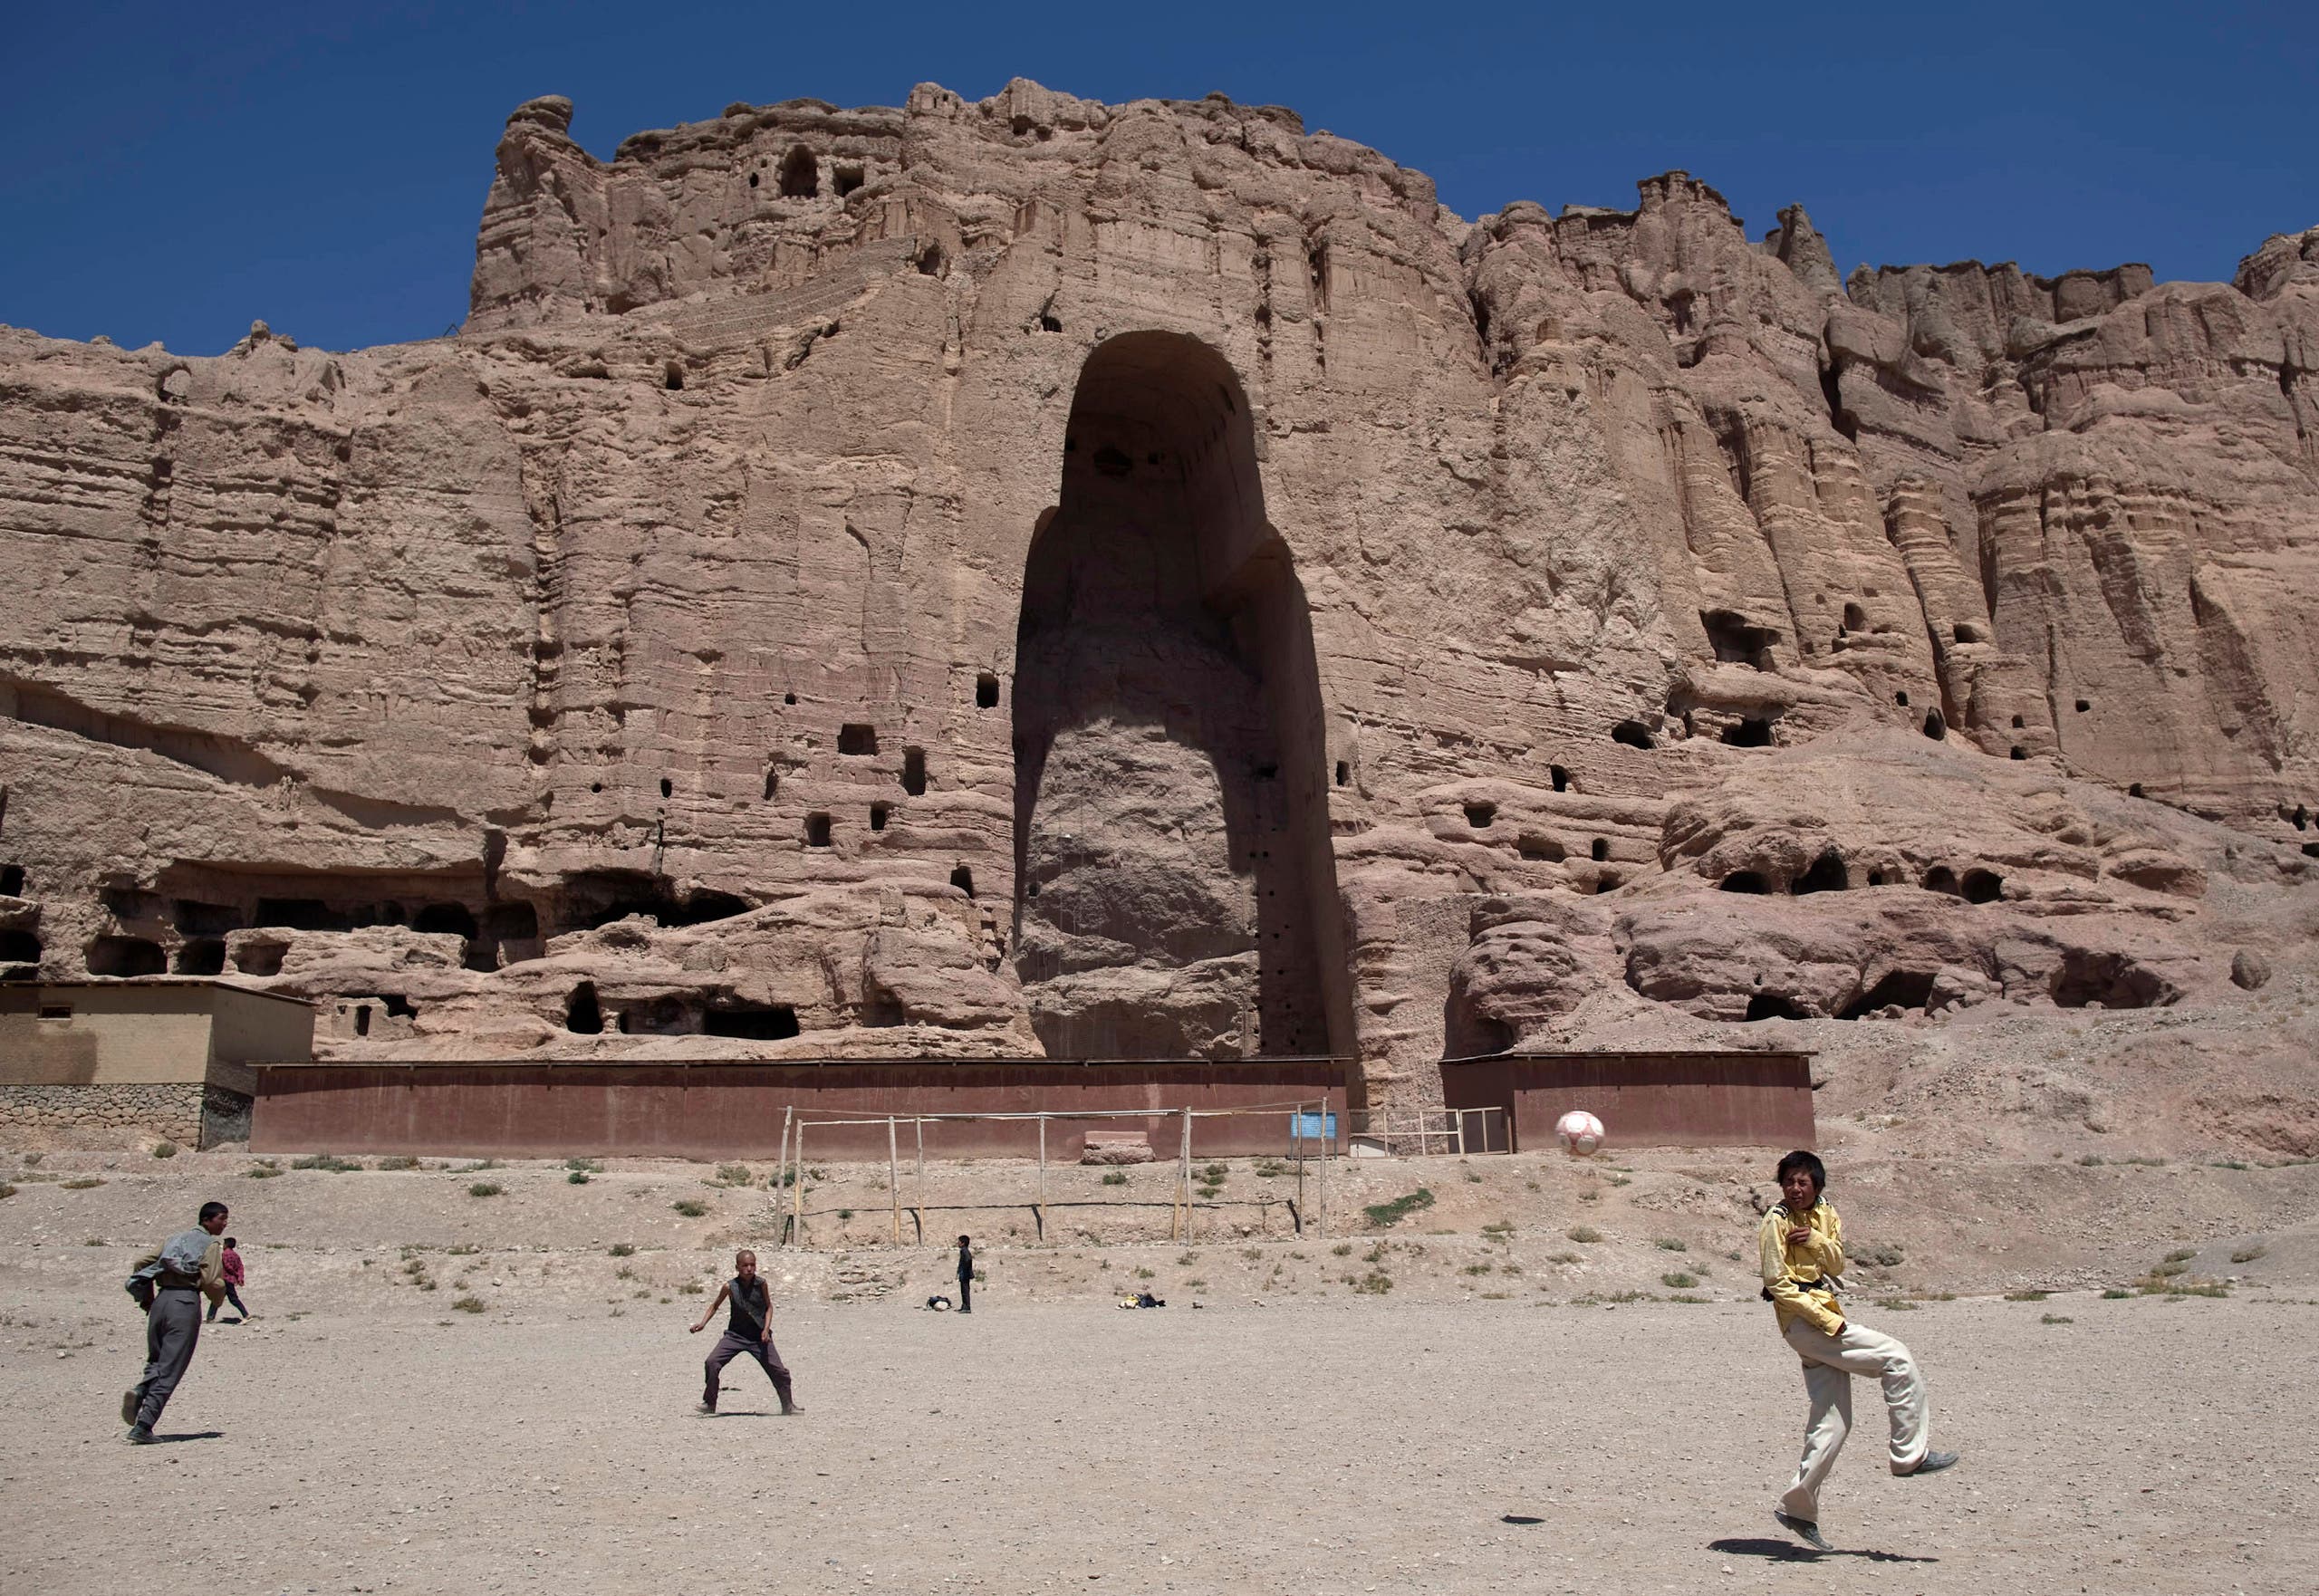 Afghan boys play soccer in front of the remains of a 1,500-year-old Buddha statue which was destroyed by the Taliban in March 2001, in the central province of Bamiyan August 22, 2011. (File photo: Reuters)